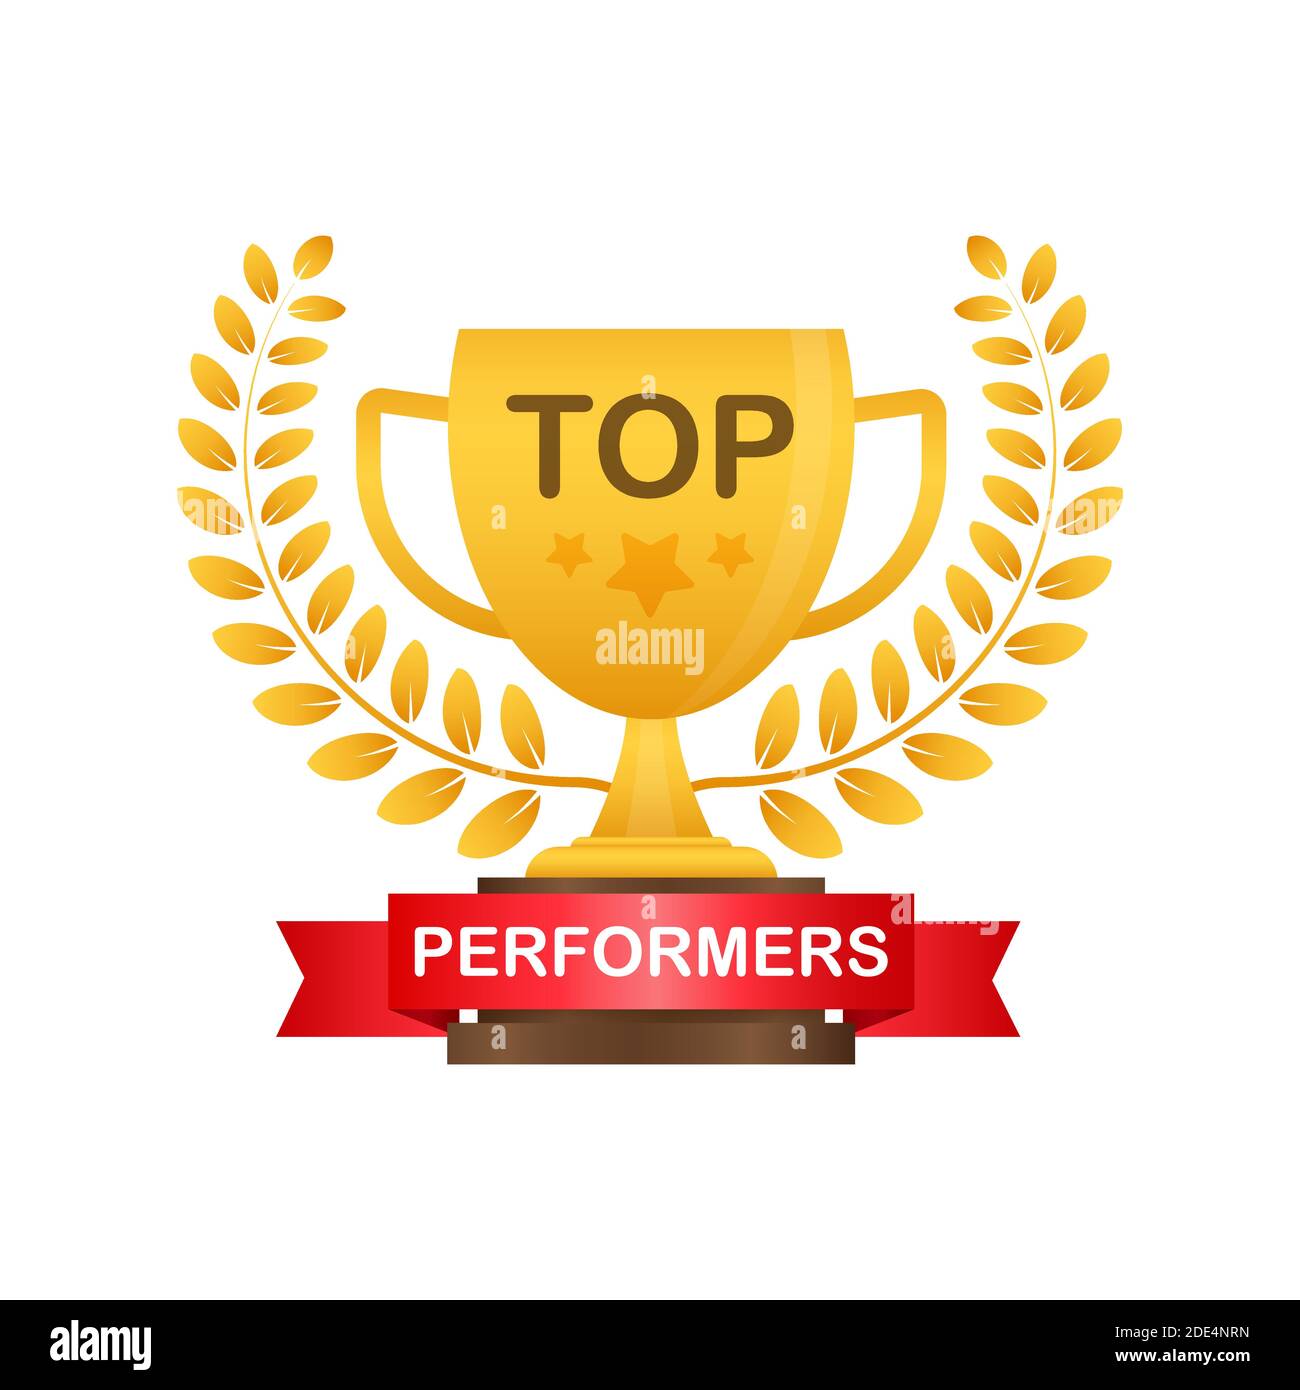 Top Performers. Website template designs. Vector illustration concepts for website and mobile website design and development. Vector illustration. Stock Vector